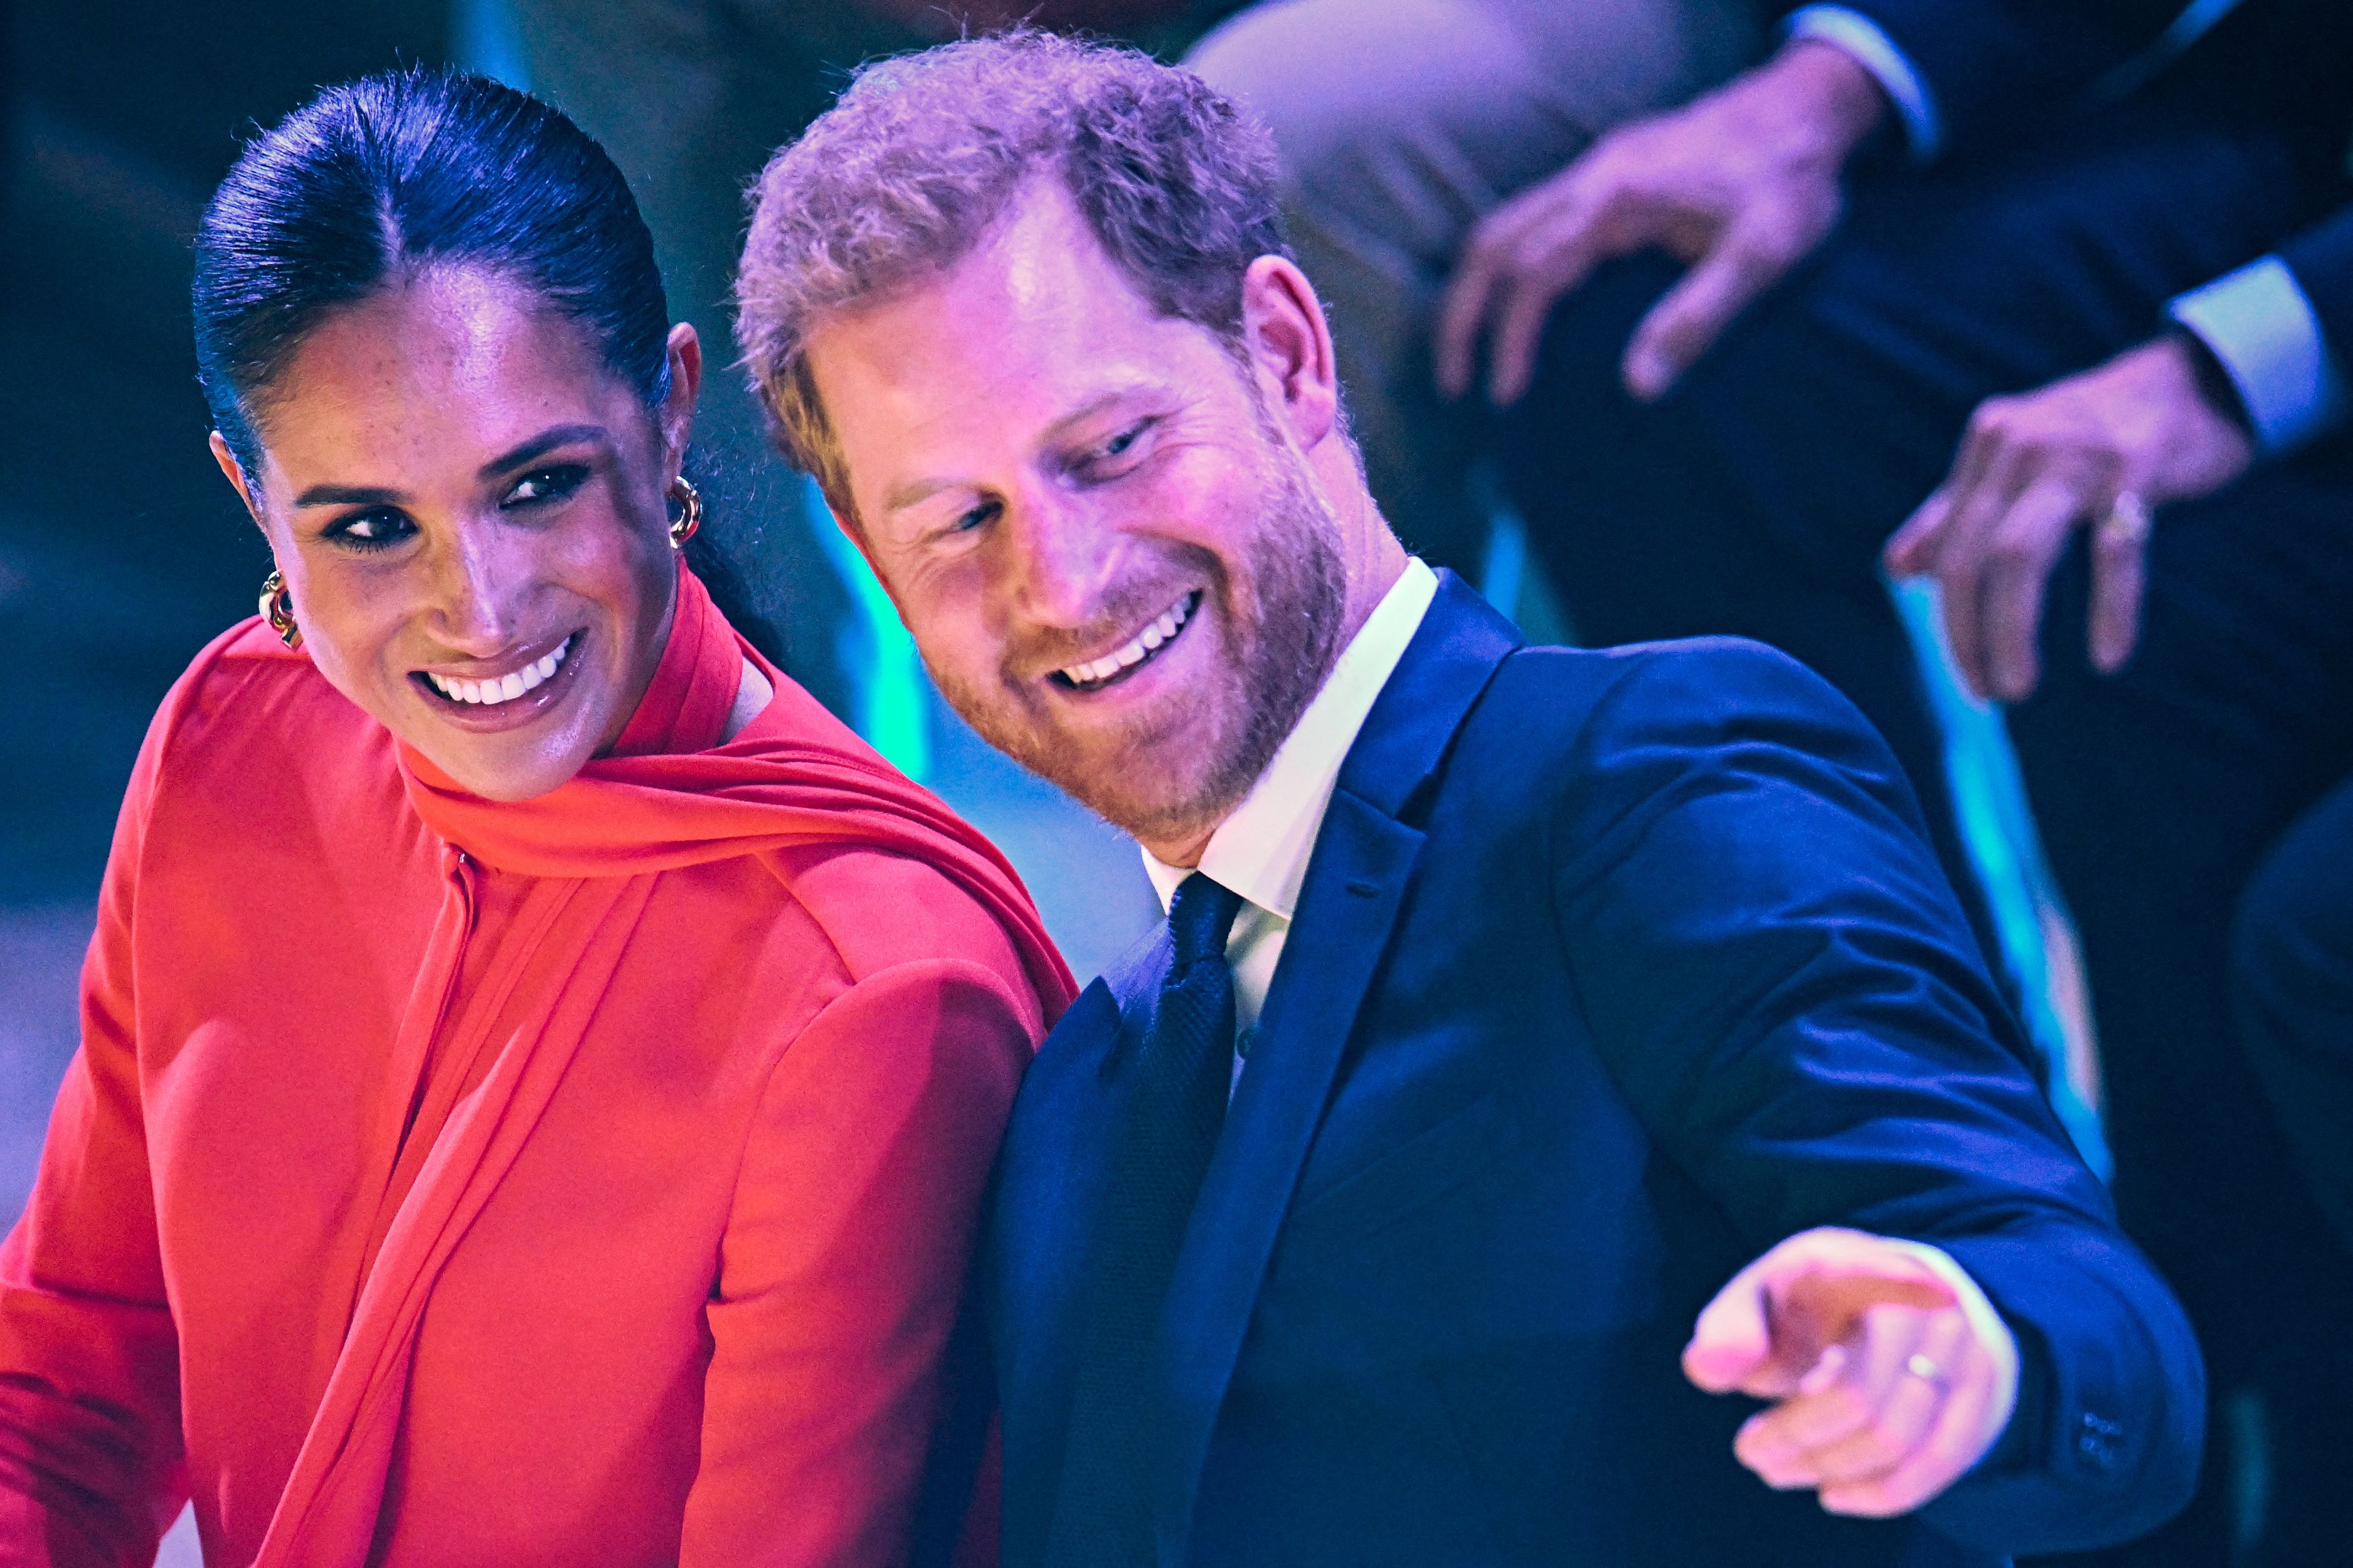 Meghan, Duchess of Sussex and Prince Harry, Duke of Sussex, react as they attend the annual One Young World Summit in Manchester, north-west England on September 5, 2022. | Source: Getty Images